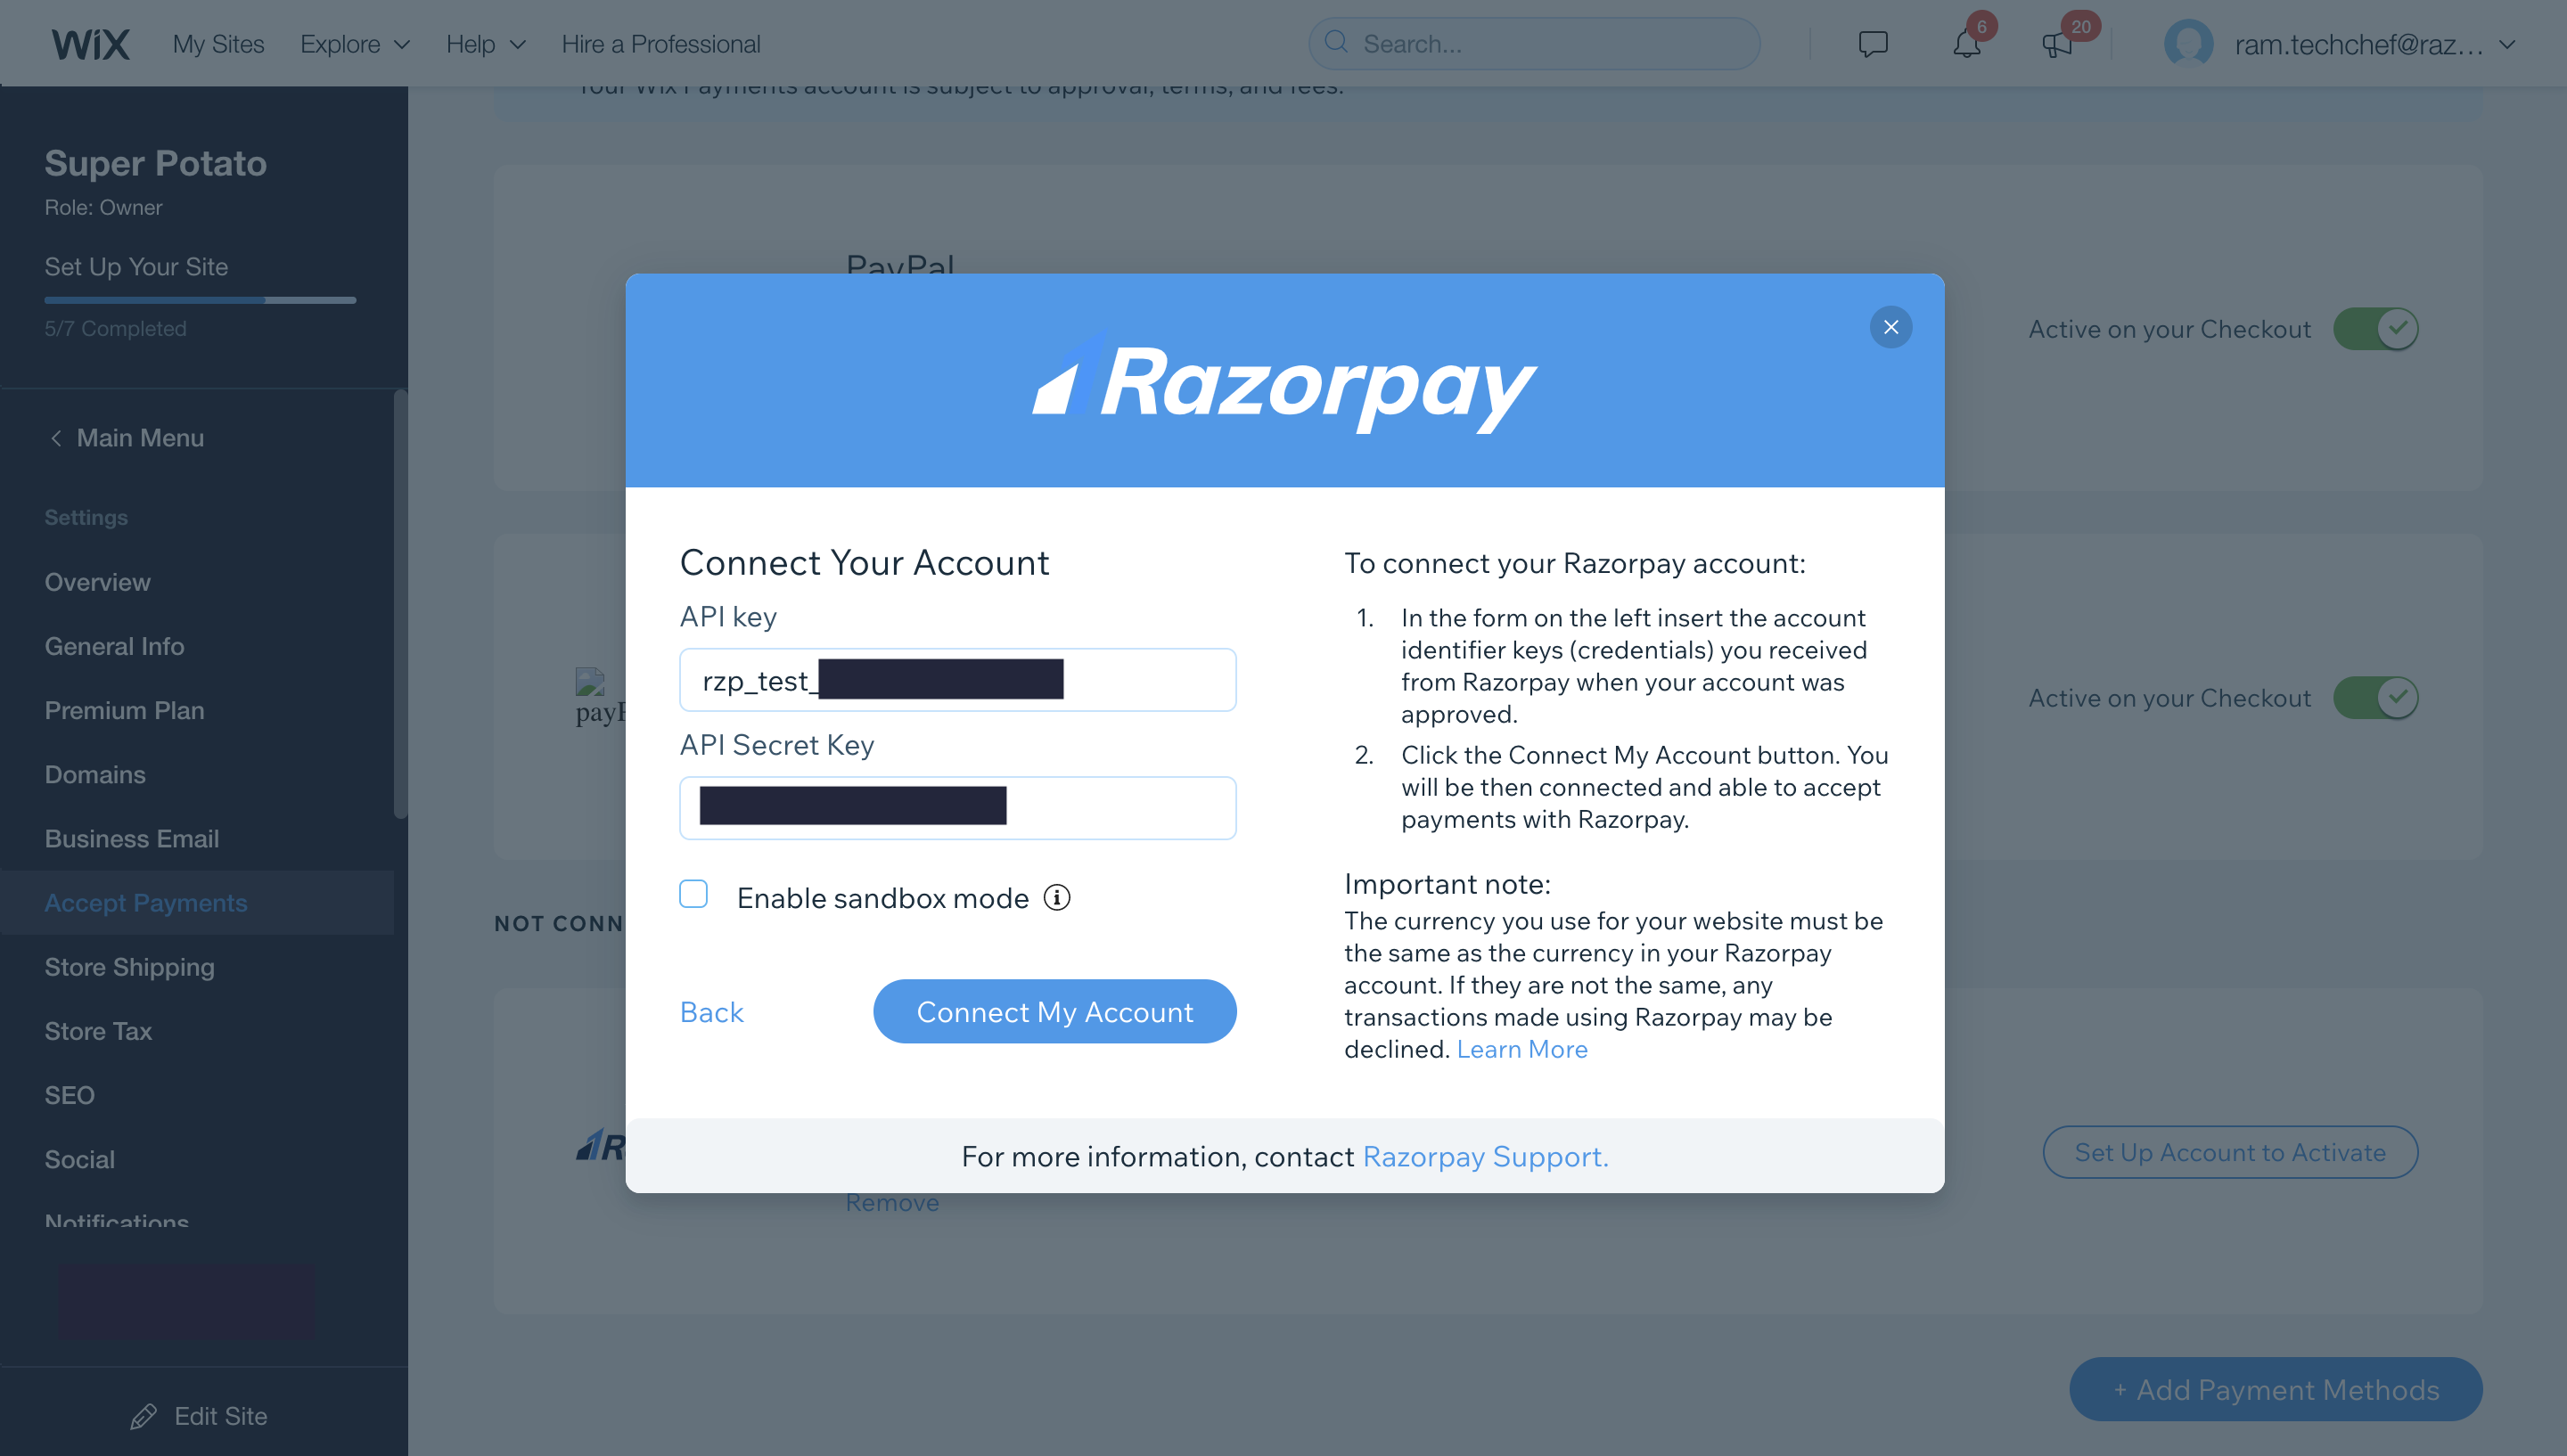 Connect Existing Account